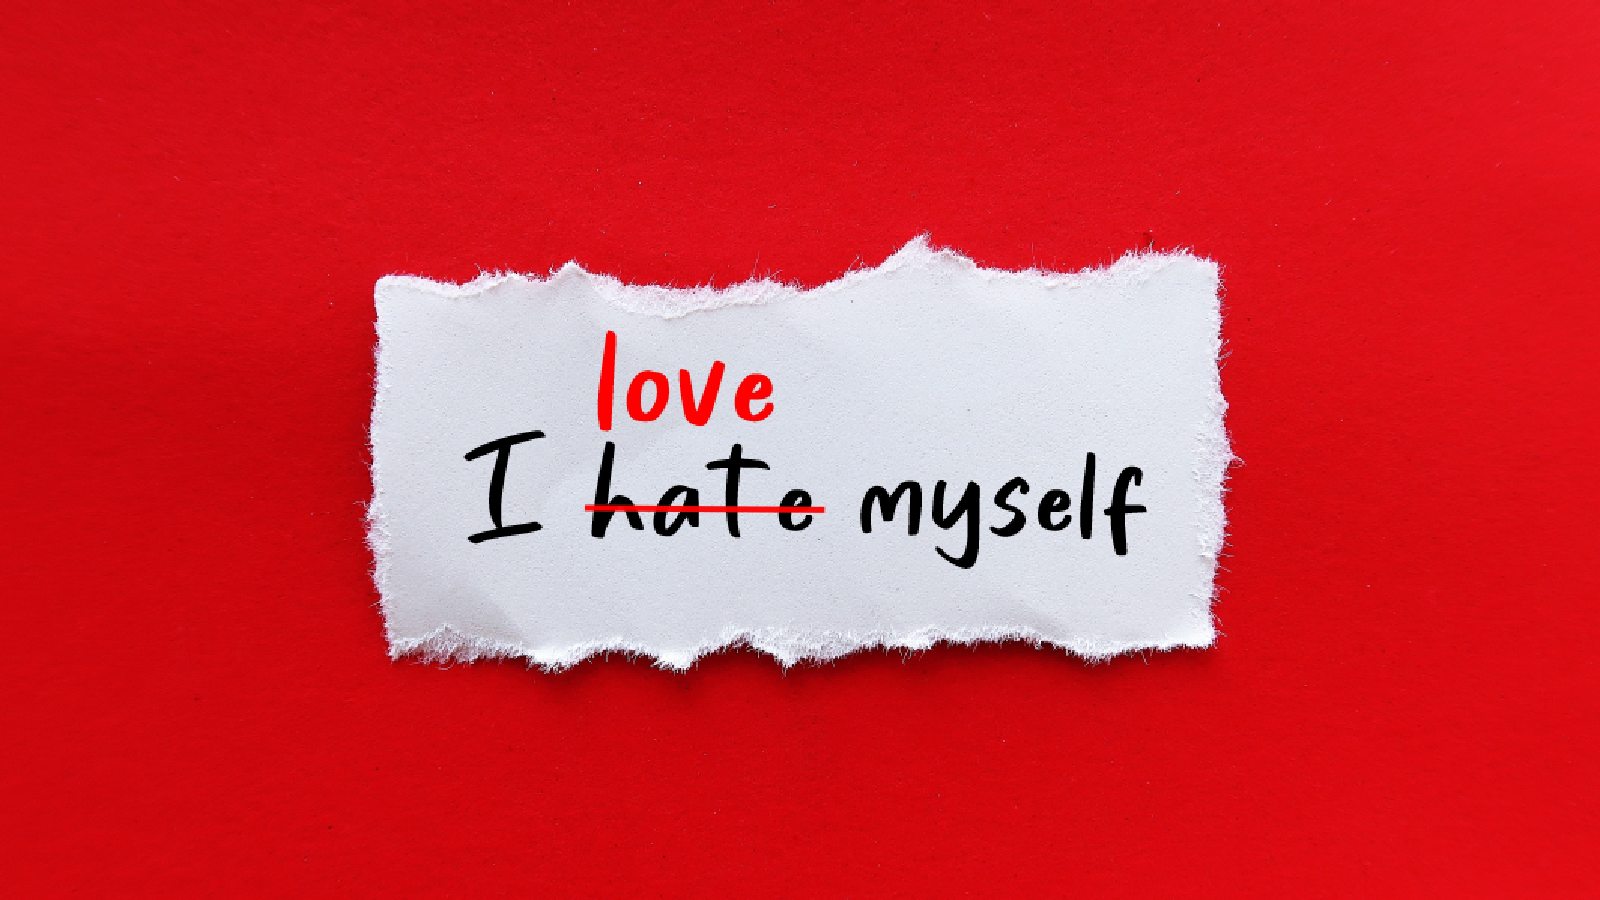 7 ways to cope with self-hatred and self-loathing